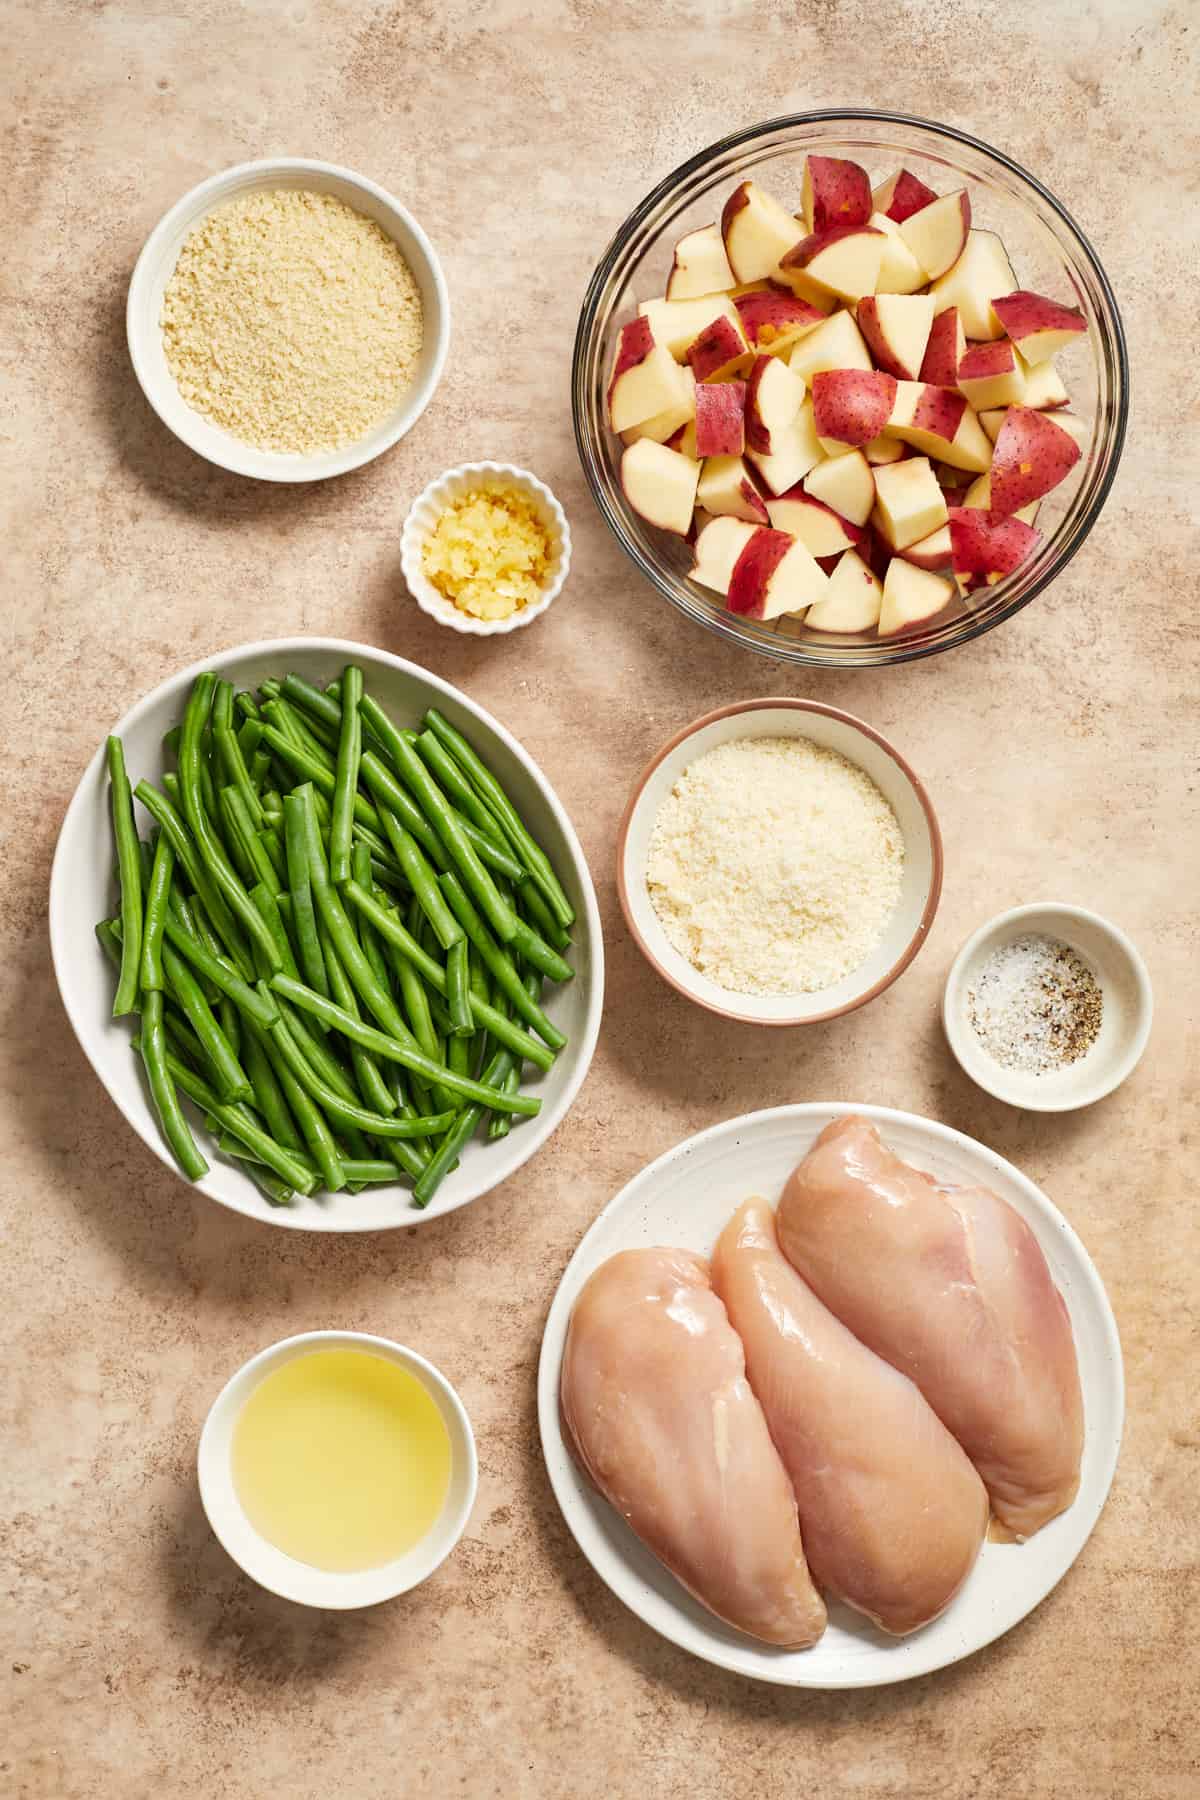 Chicken breast, green beans, potatoes, olive oil, parmesan and other ingredients needed for recipe on surface.